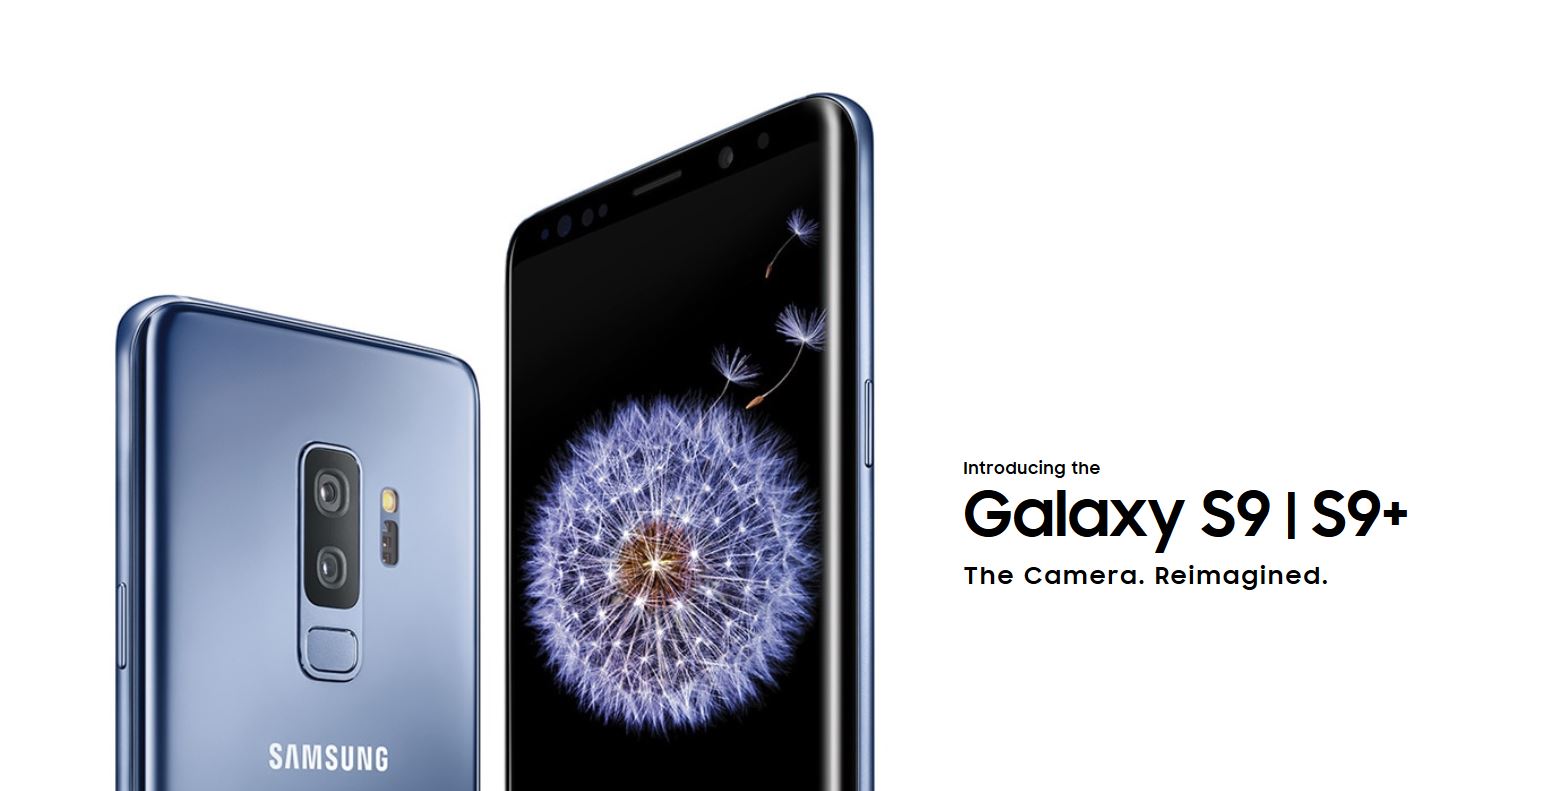 Samsung Galaxy S9 and S9 Plus Dual Camera, AR, Stereo Speaker and DeX Pad Launched